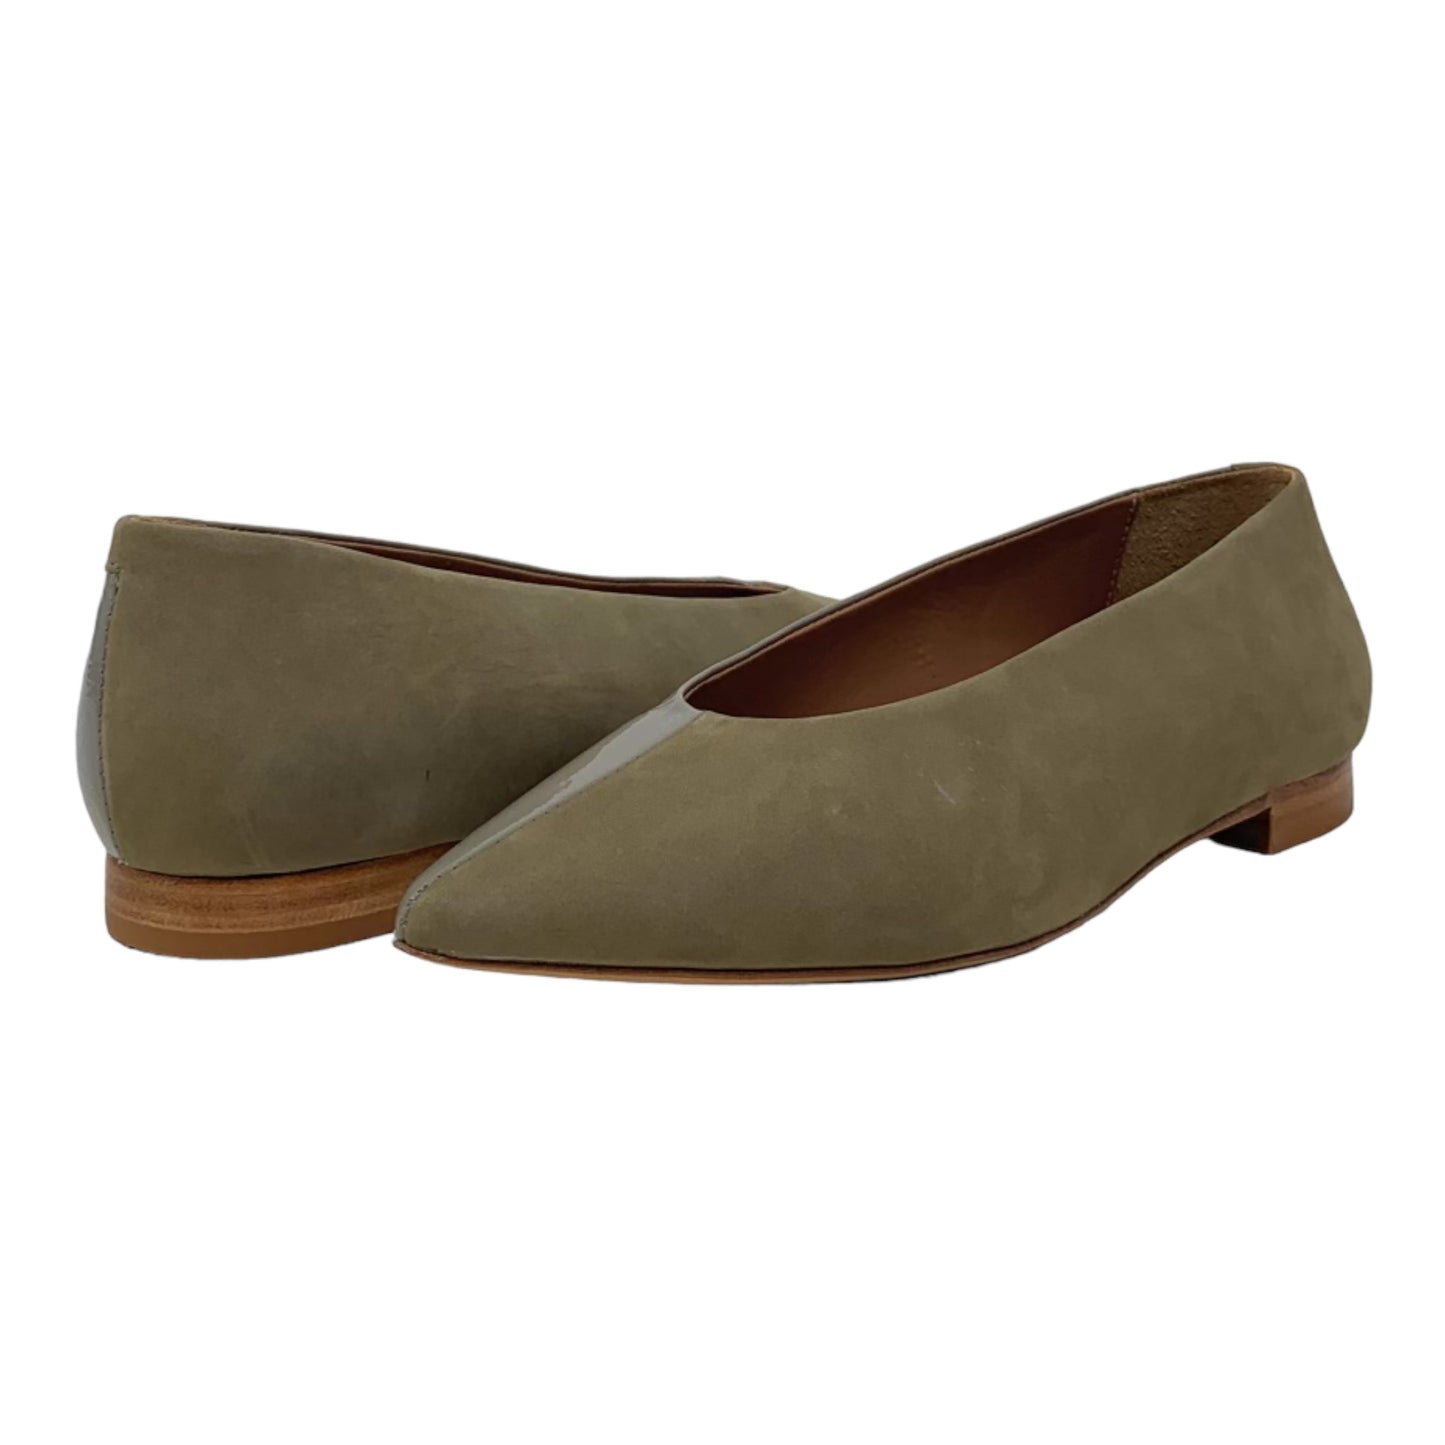 VICENZA | HAL | TAUPE SUEDE/PATENT LEATHER